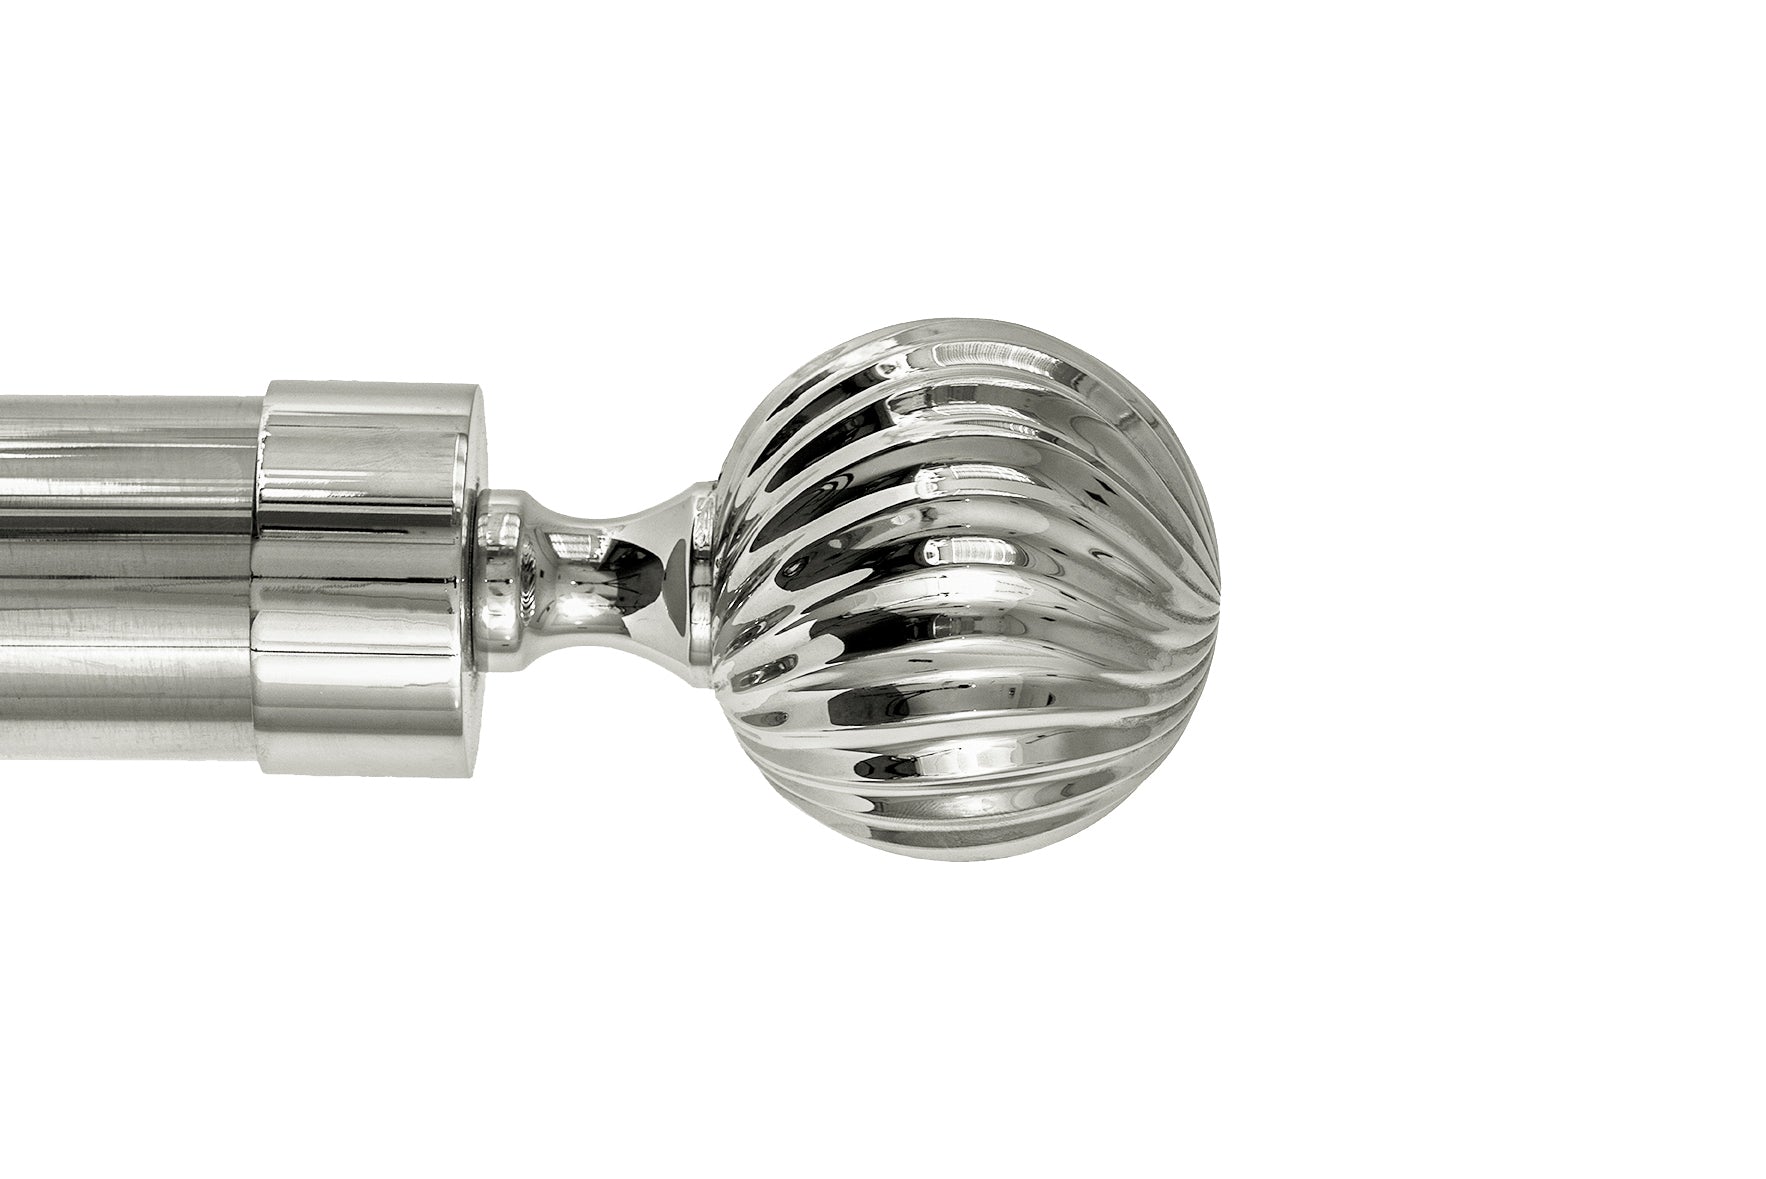 Tillys Classic Twisted Ball Finial Curtain Pole Set in Polished Nickel